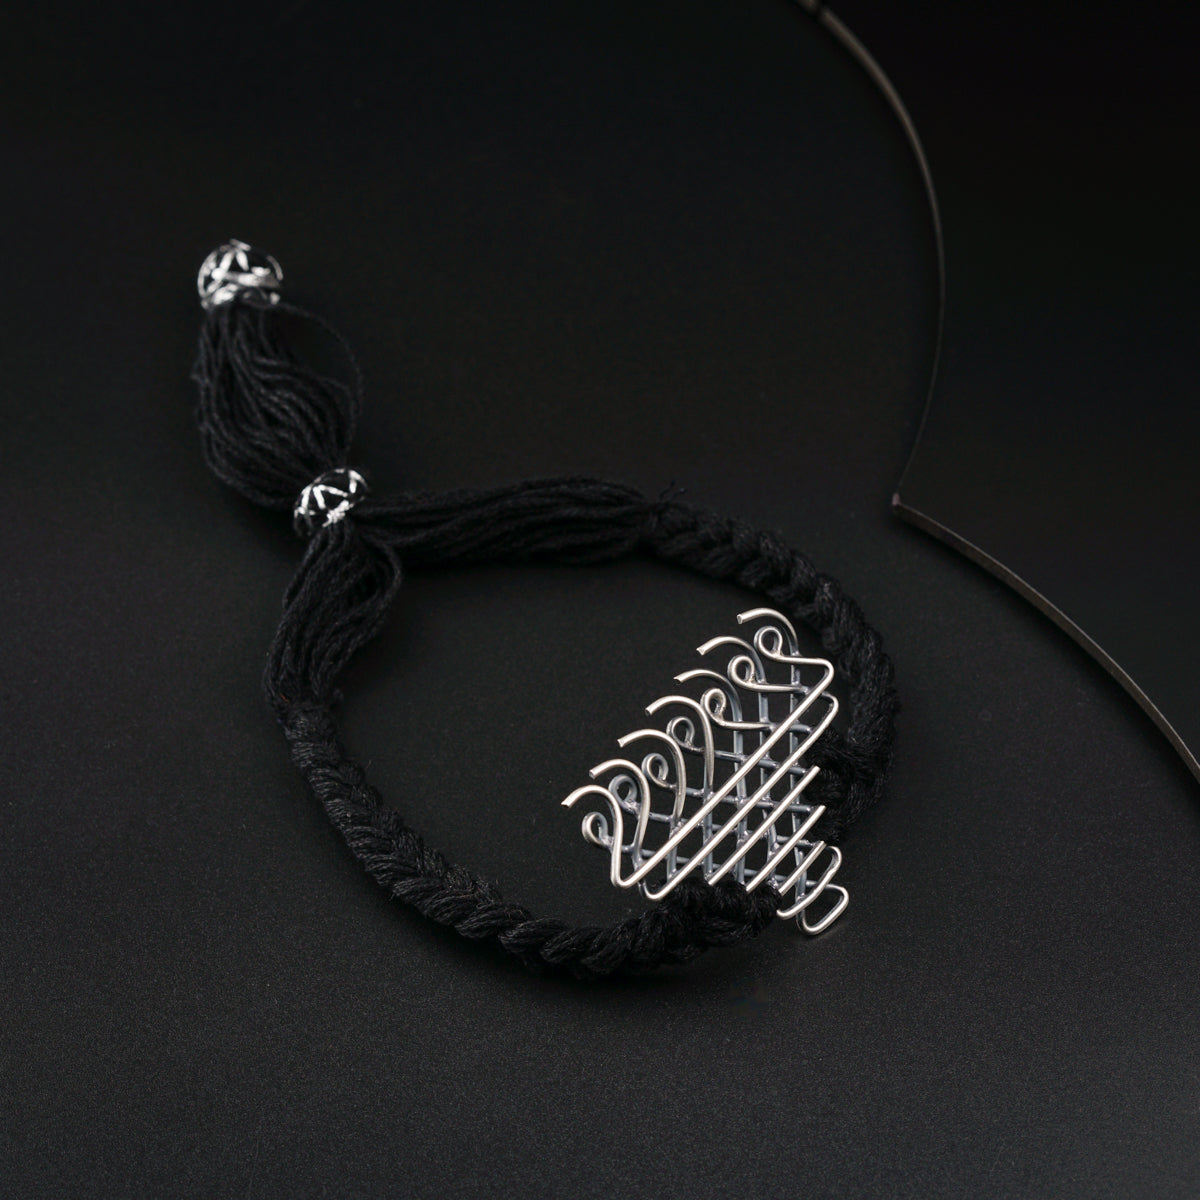 a black string bracelet with a silver bead on it